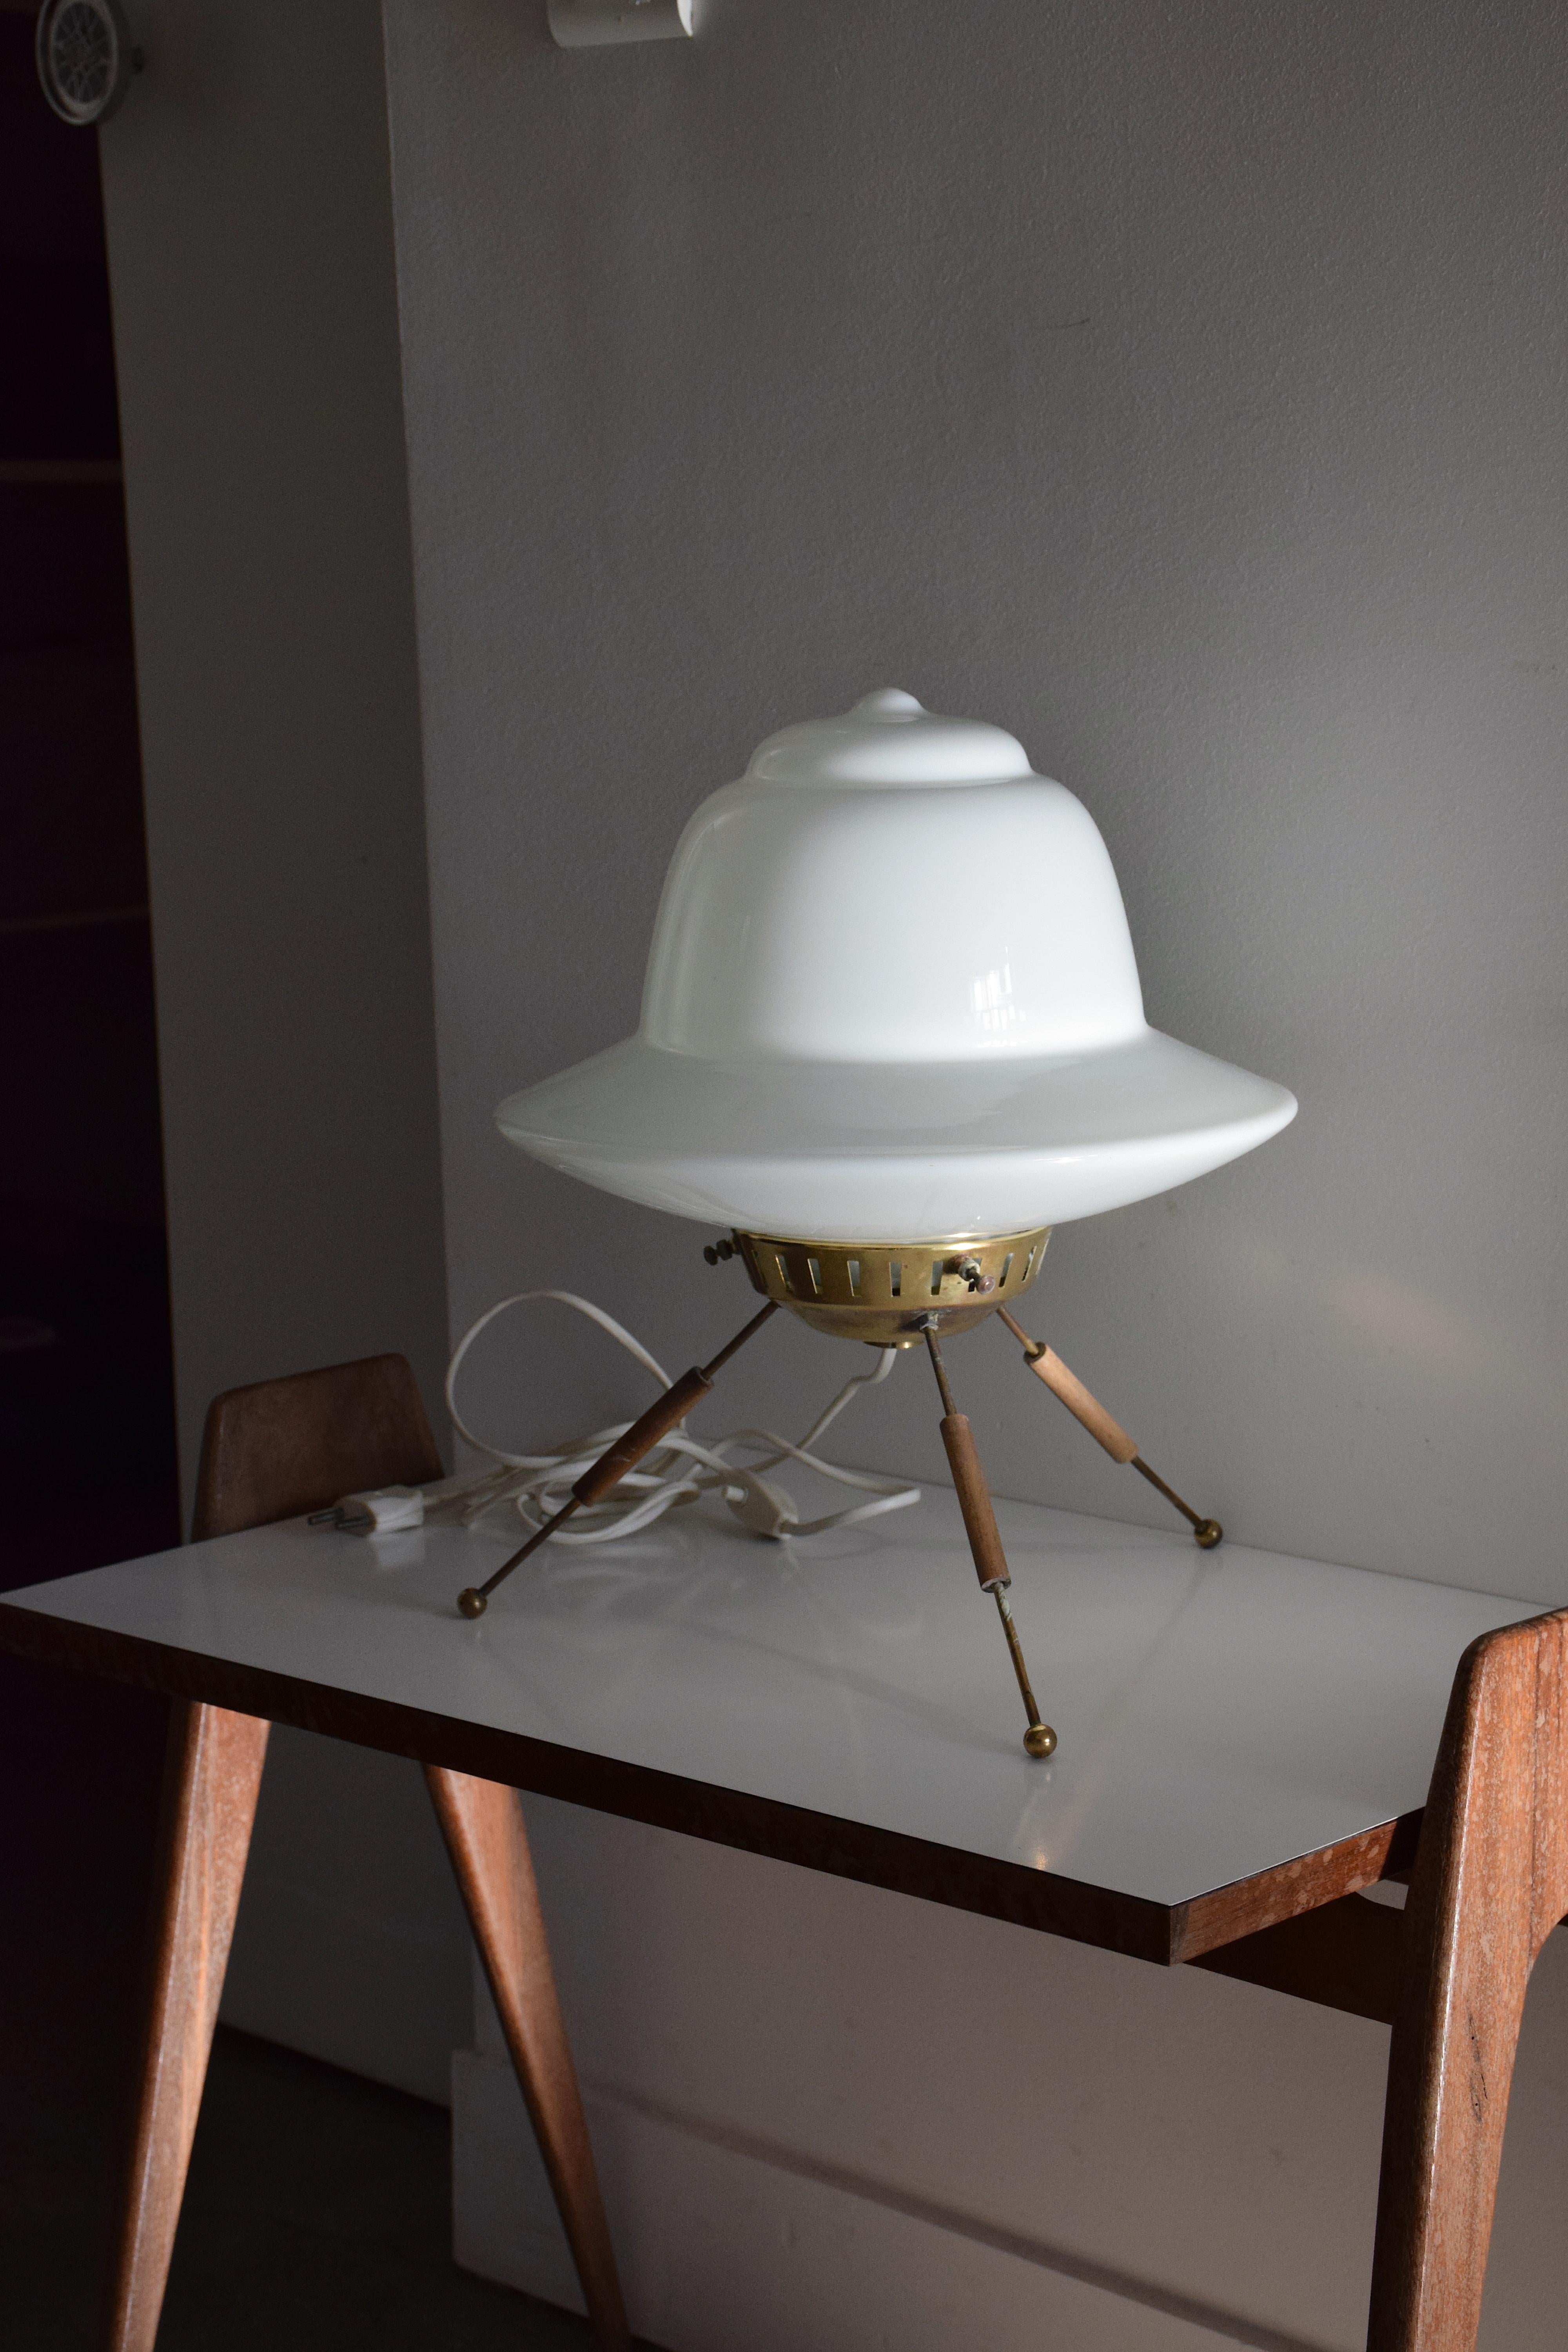 An astonishing Mid-Century Modern vintage table lamp in space-age style sitting on delicate brass and wooden splayed tripod legs. The shade is white opaline glass. A rare design that resembles a spaceship. Quite tall for its design. One of our